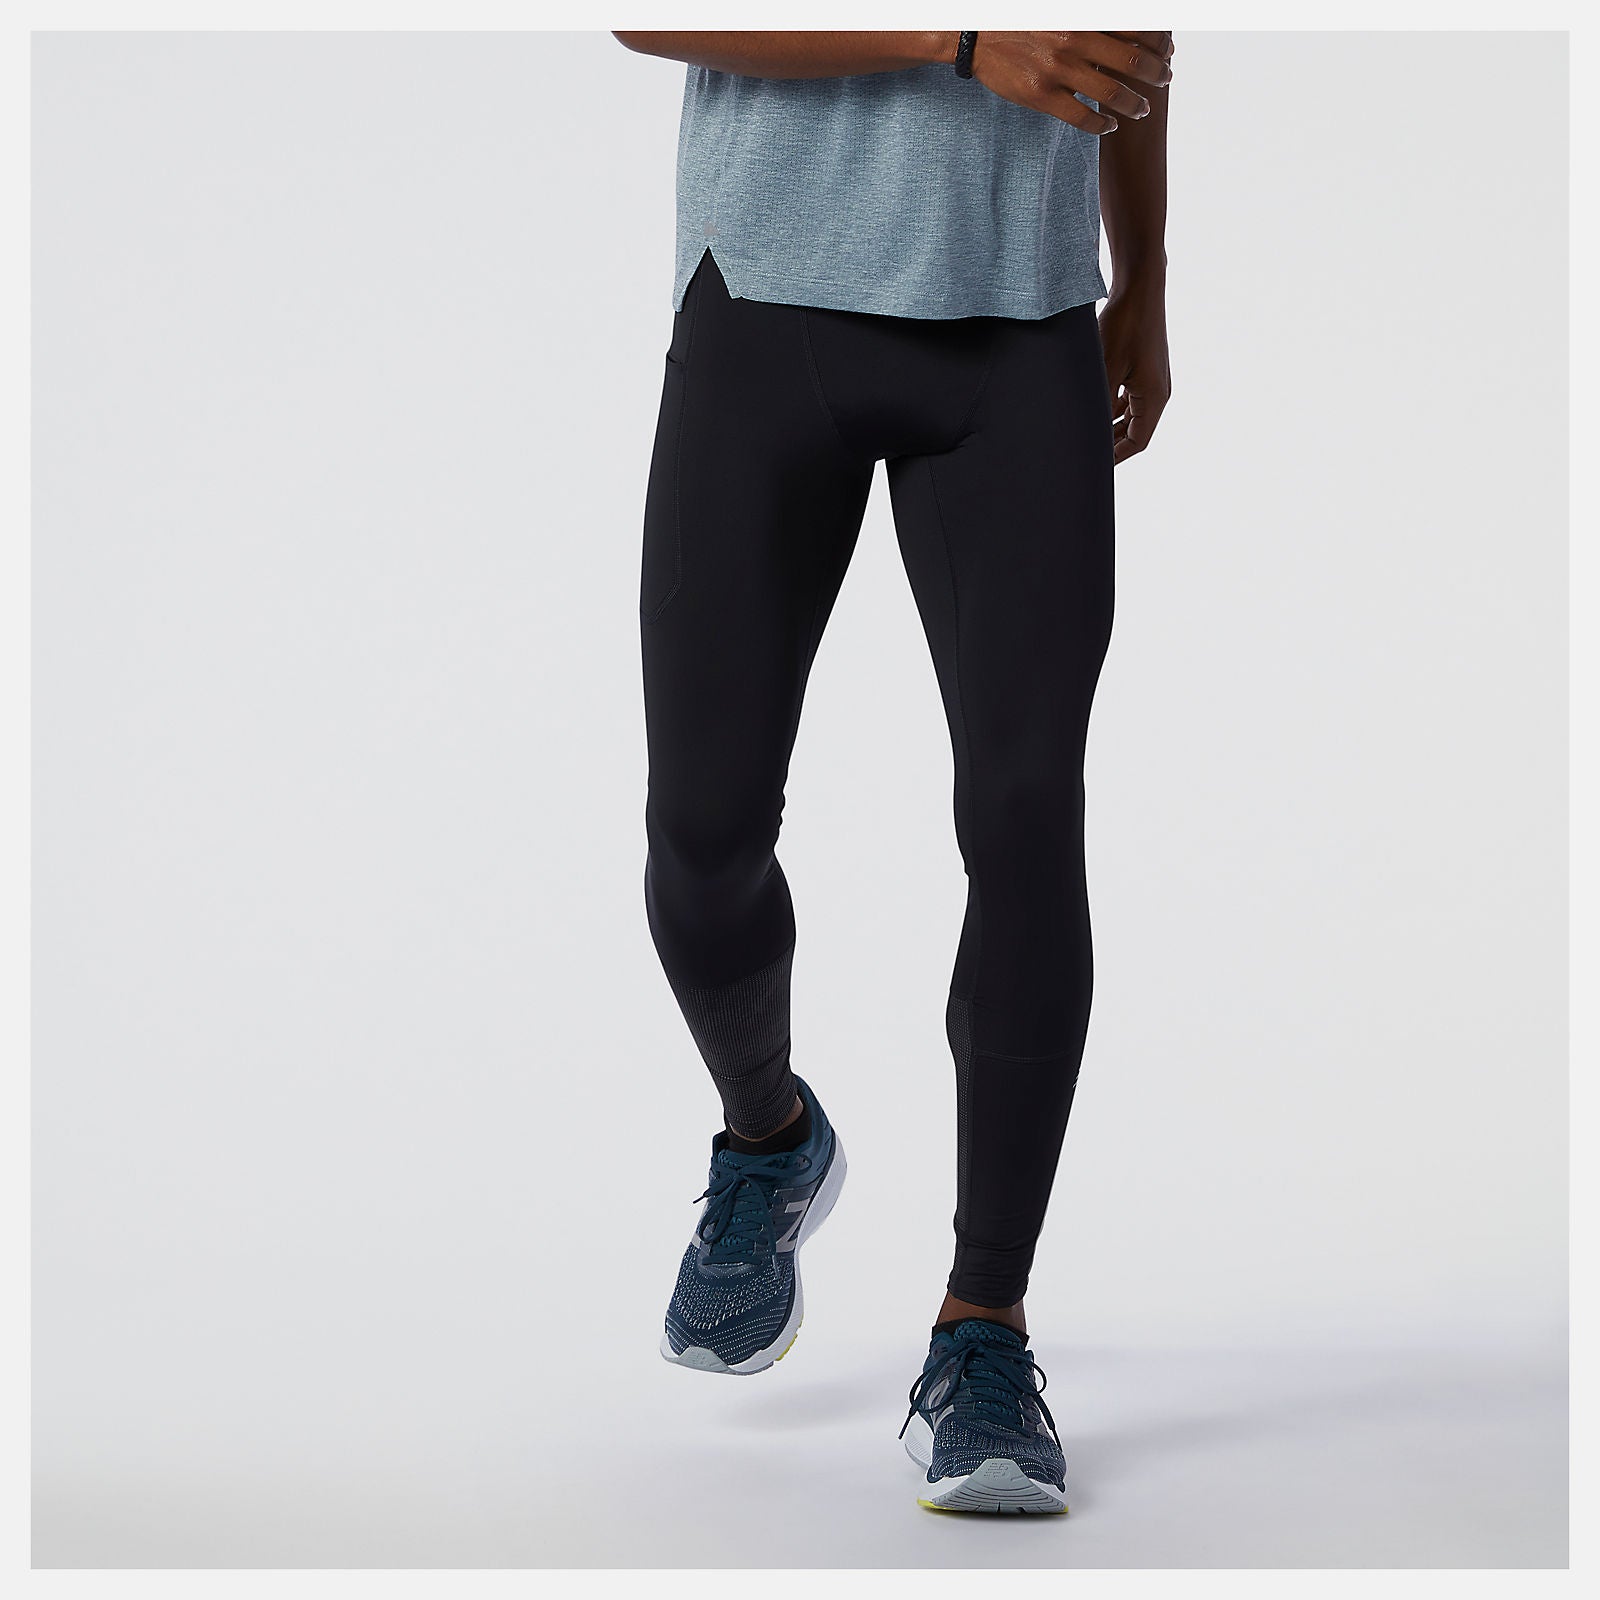  Under Armour Men's CoolSwitch Run Tights, Black  (001)/Reflective, Small : Clothing, Shoes & Jewelry